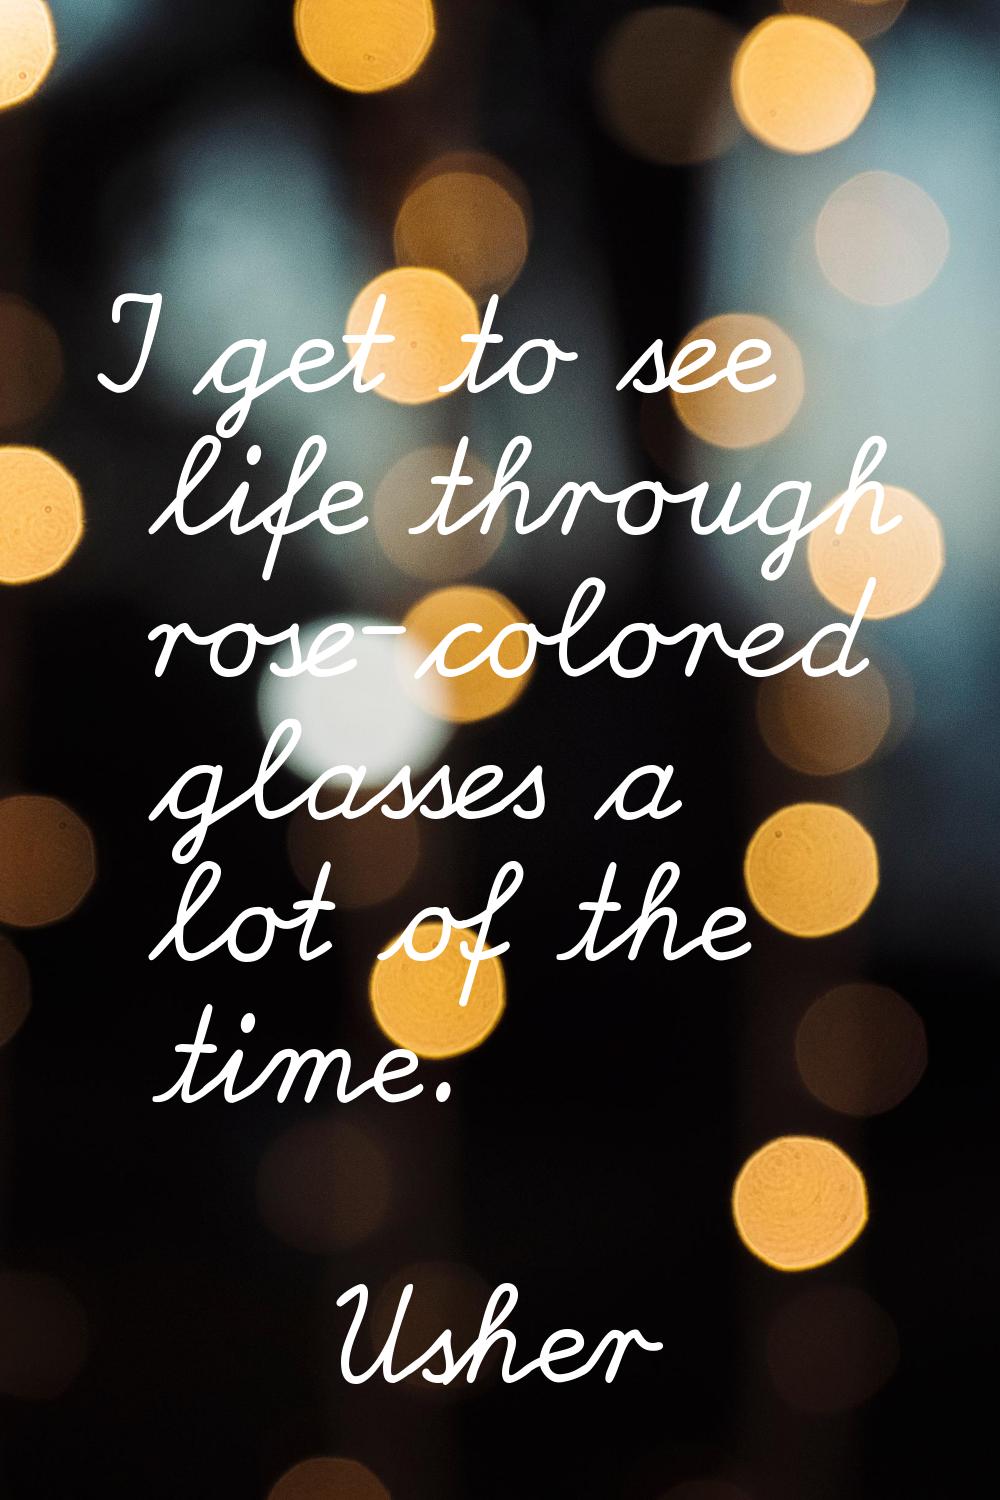 I get to see life through rose-colored glasses a lot of the time.